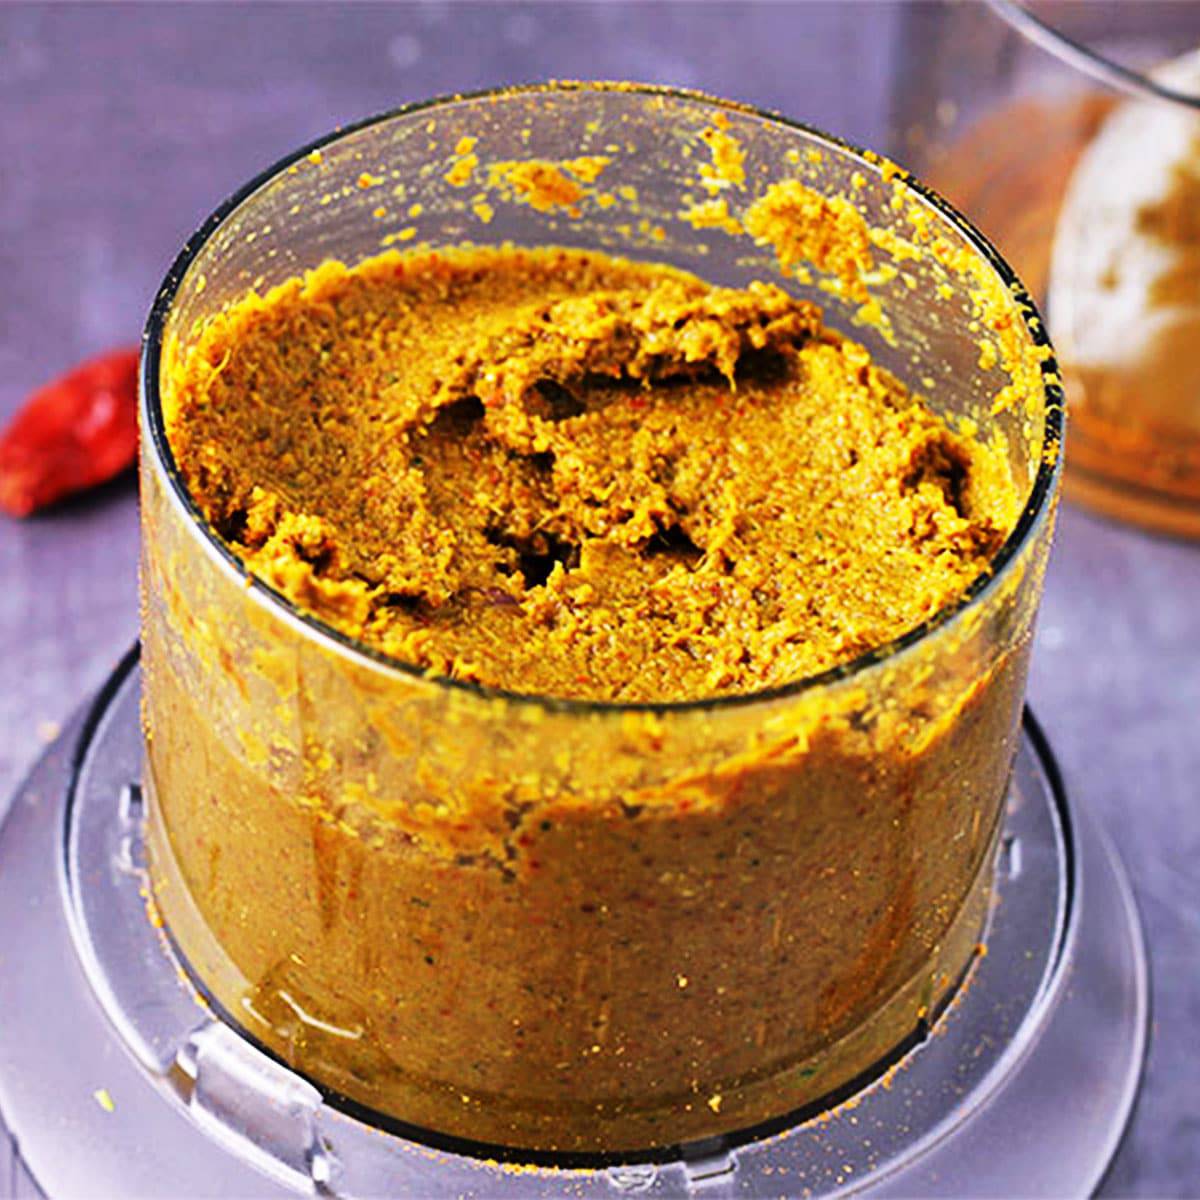 Making Curry Paste in a Food Processor